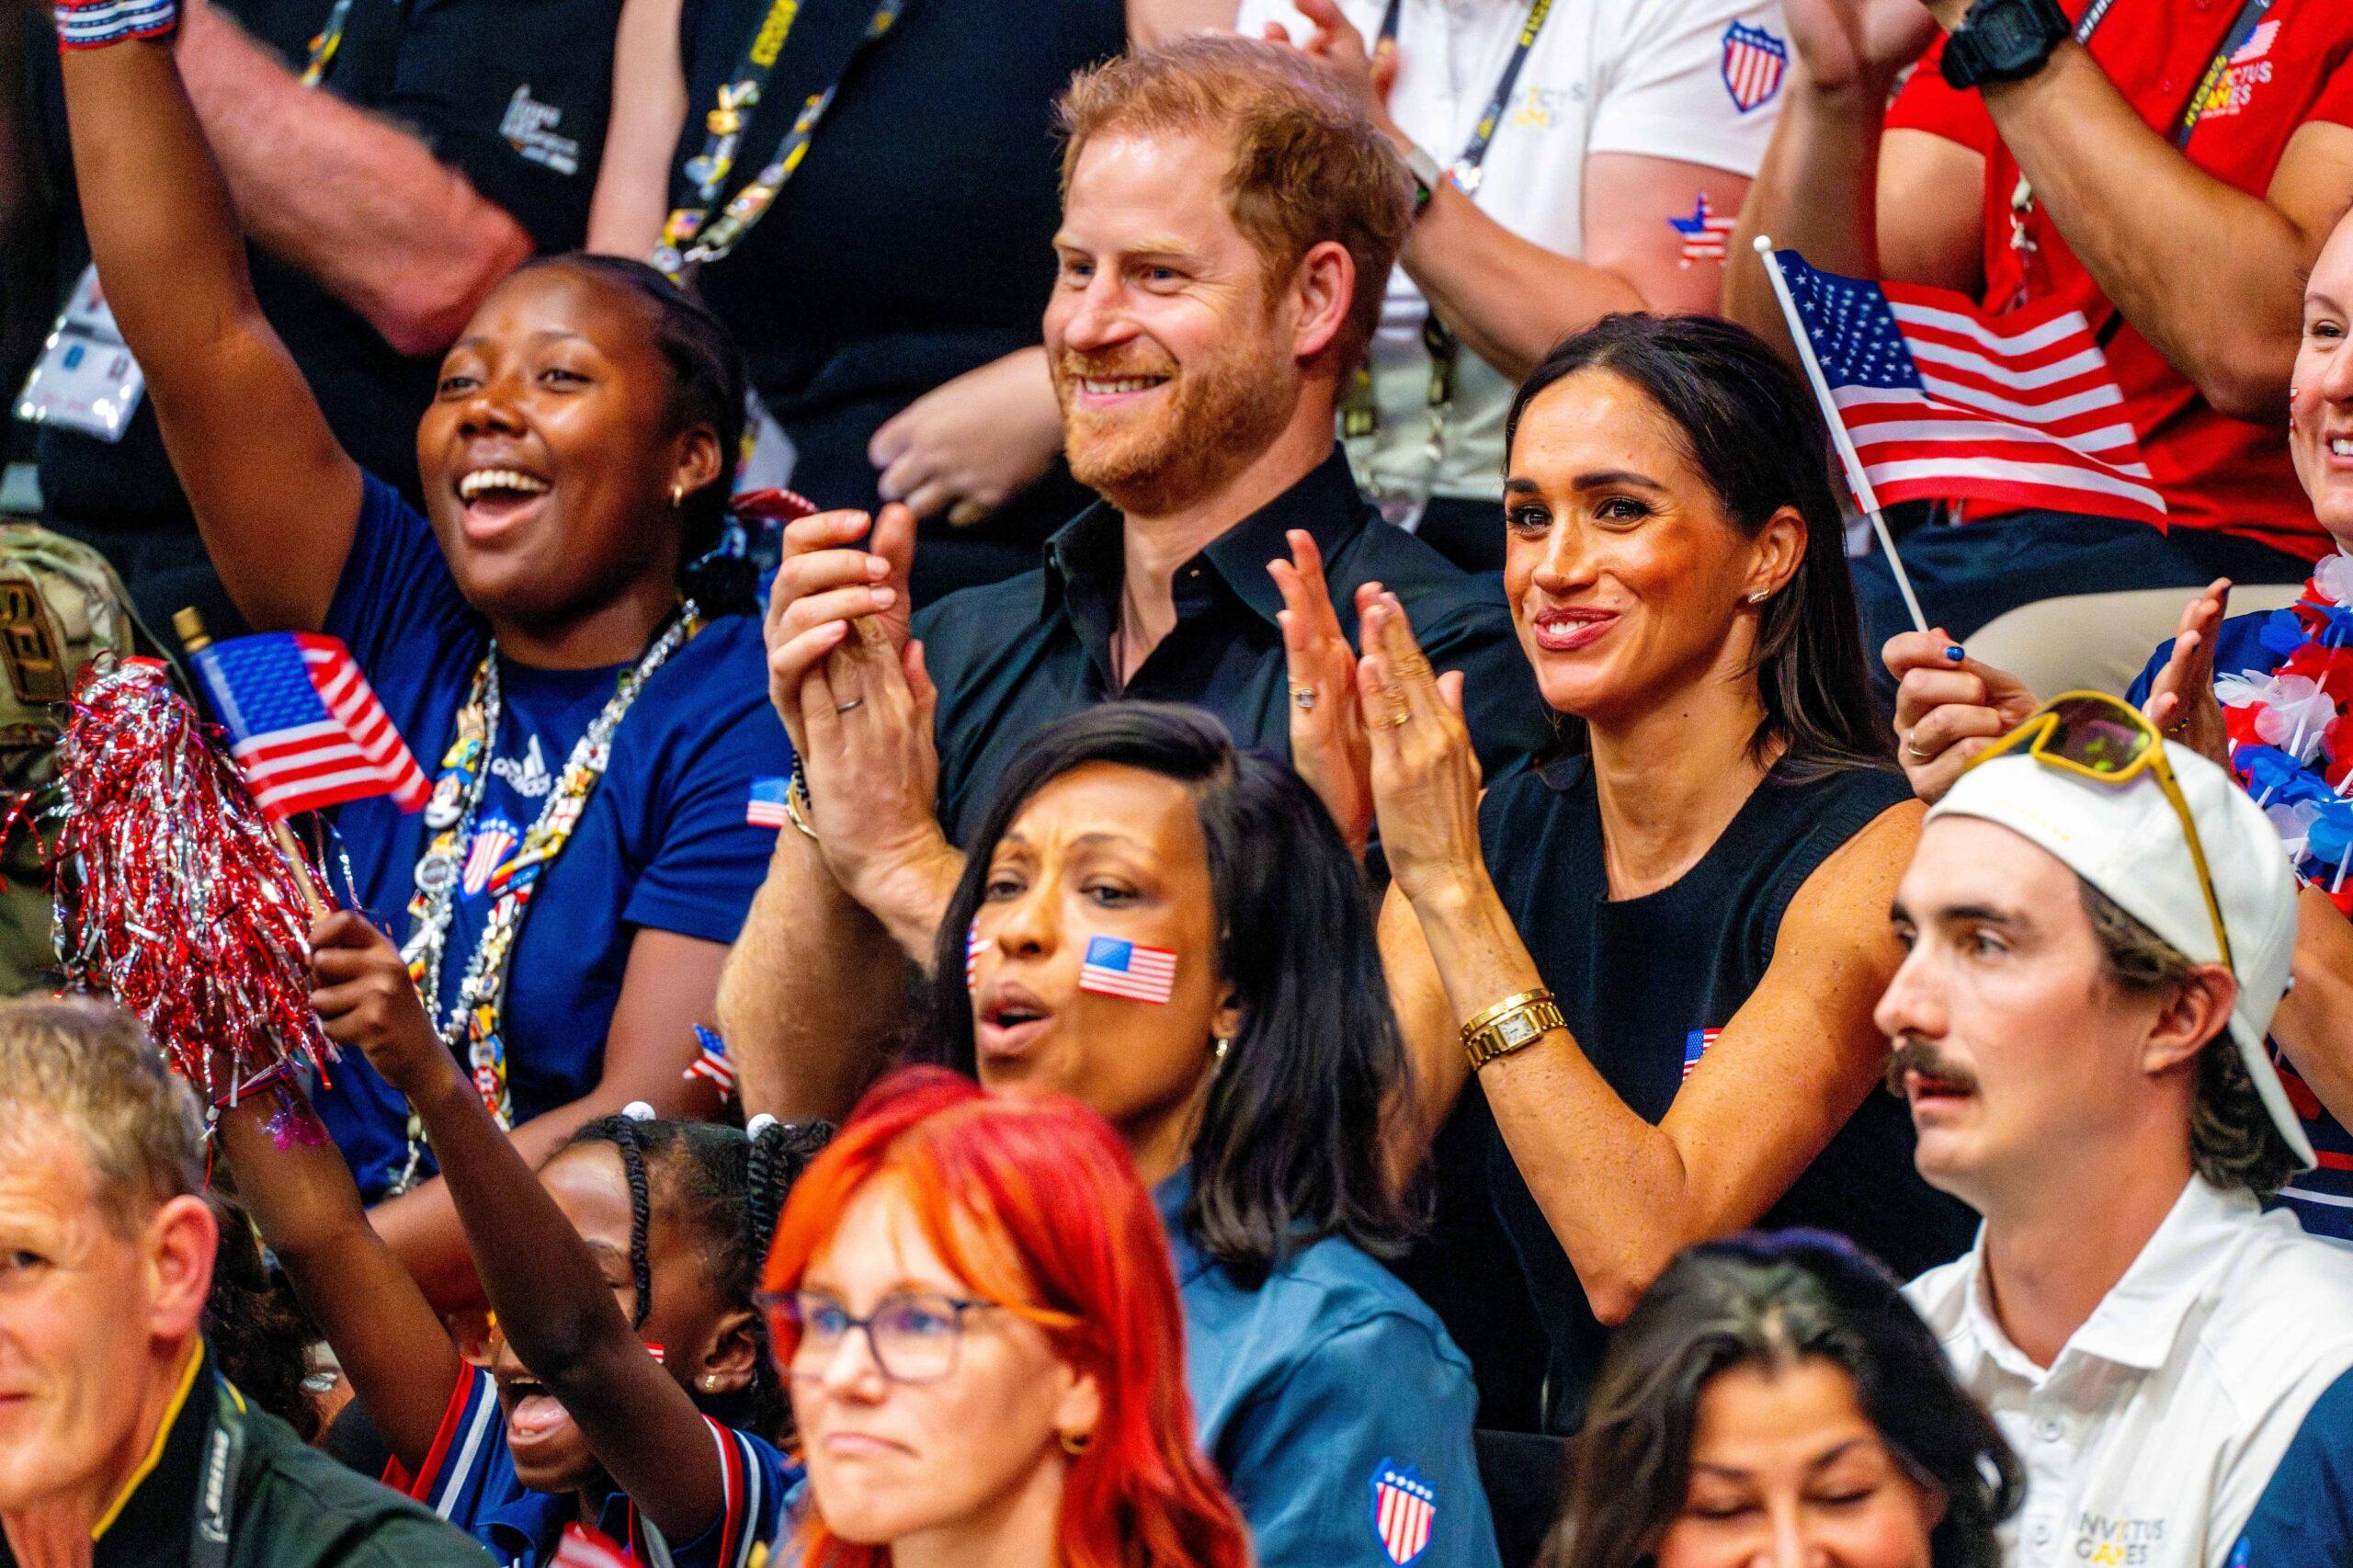 Prince Harry & Meghan Markle smiling and clapping